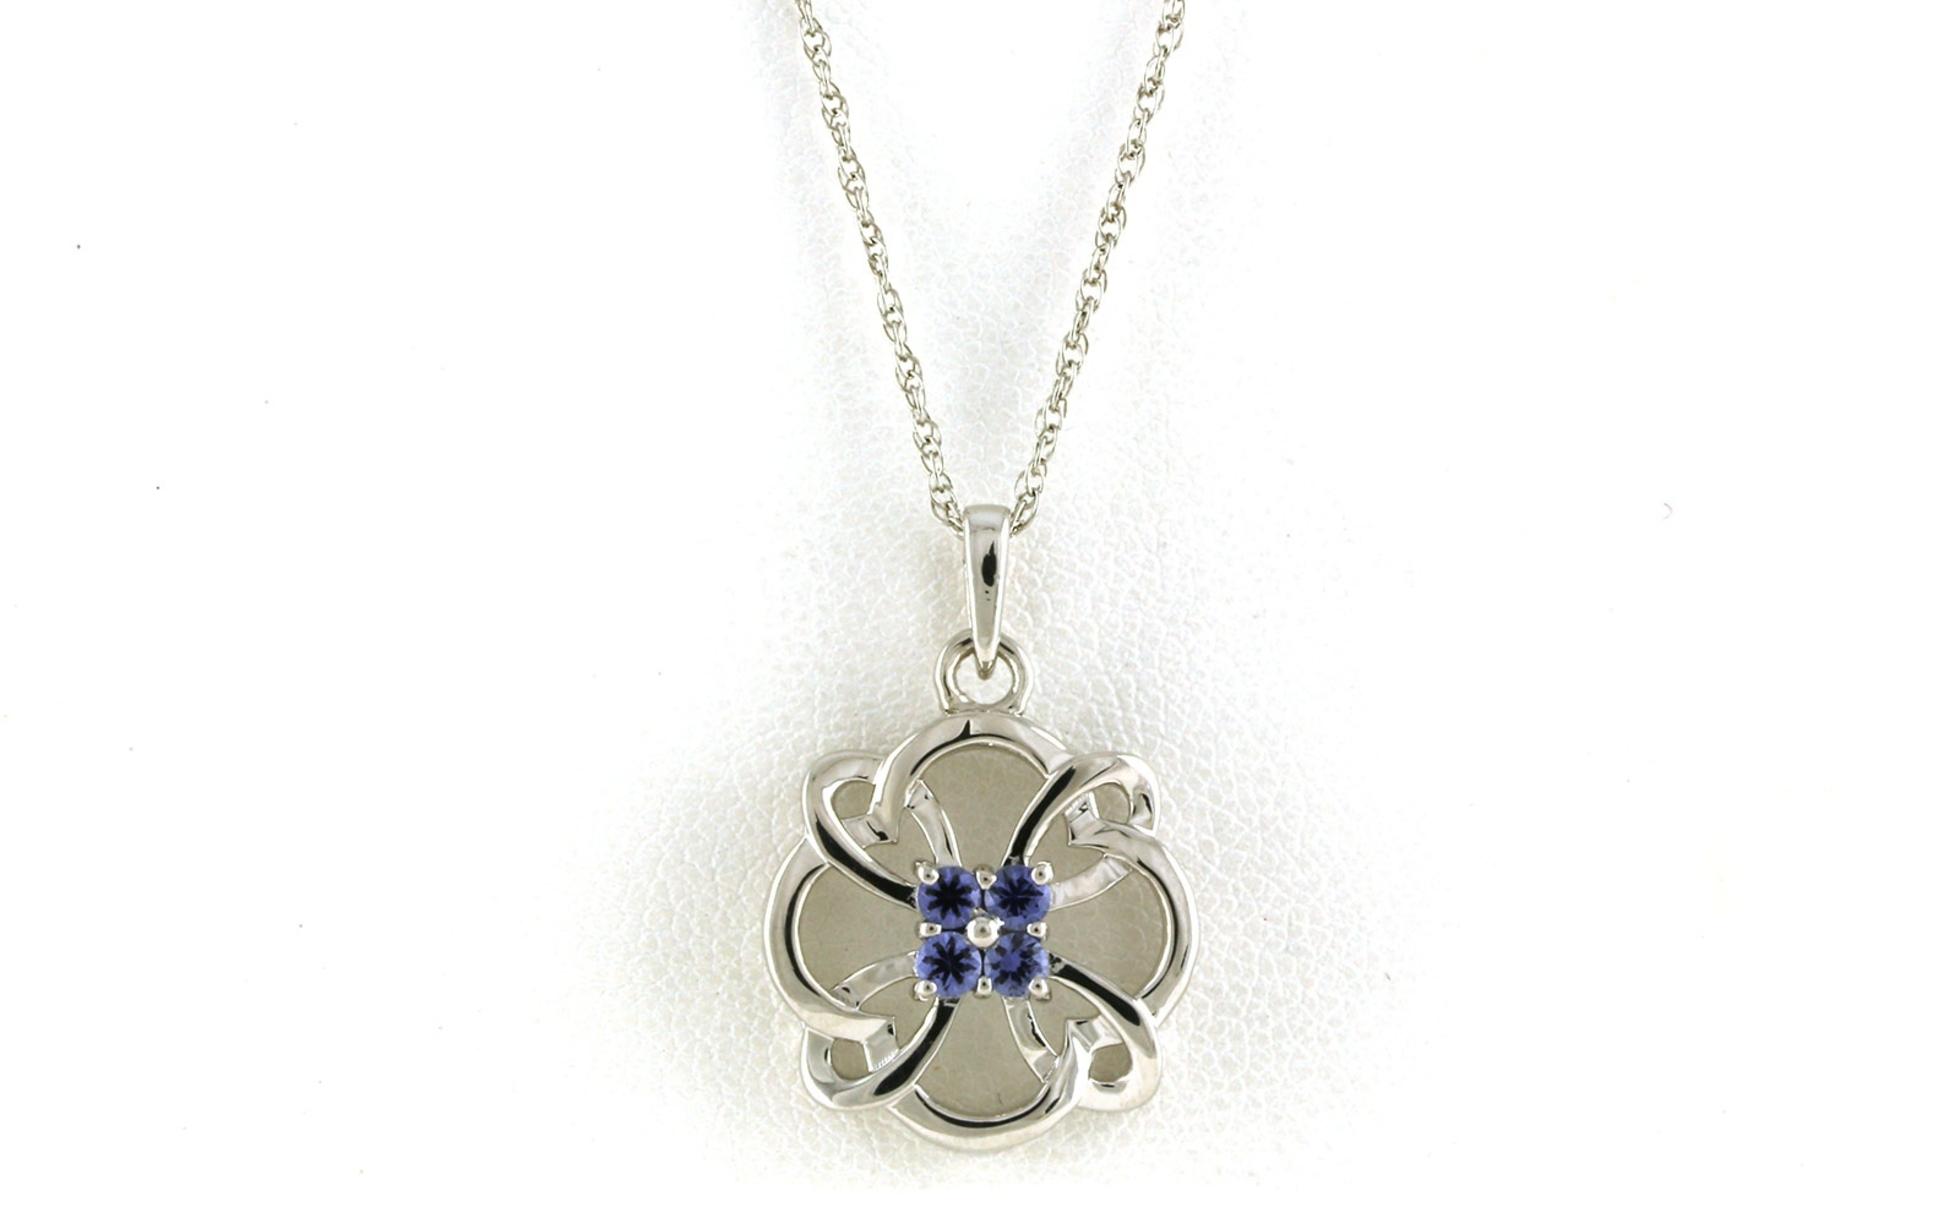 4-Stone Cluster Celtic Knot Montana Yogo Sapphire Necklace in Sterling Silver (0.24cts TWT)